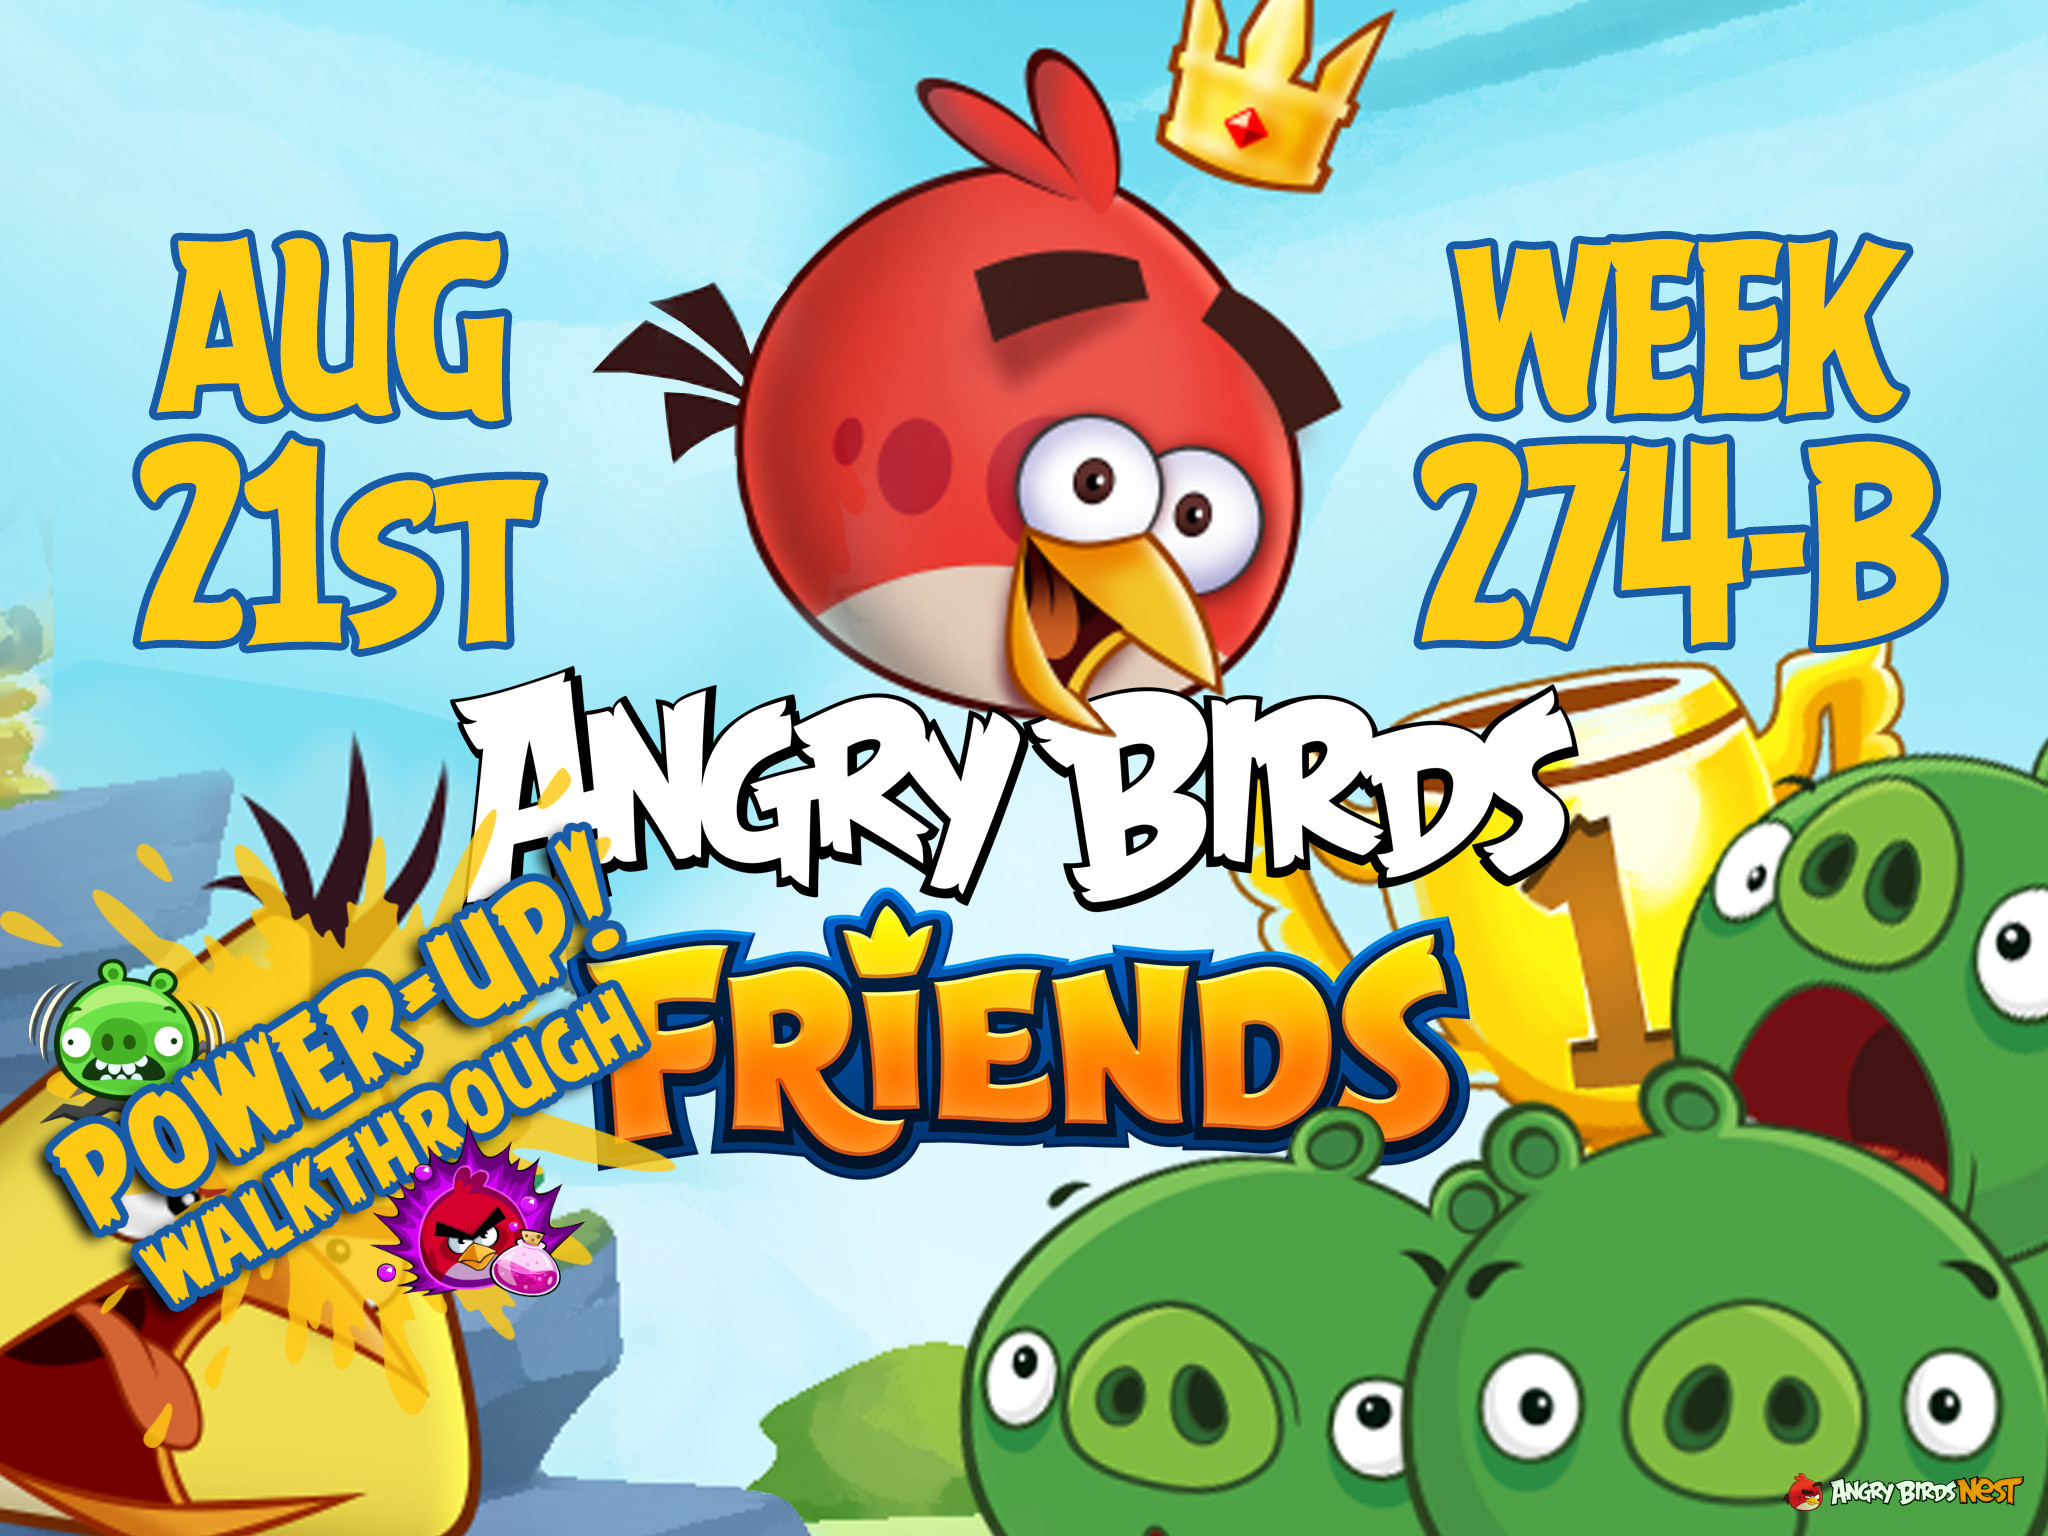 Angry Birds Friends Tournament Week 274-B Feature Image PU